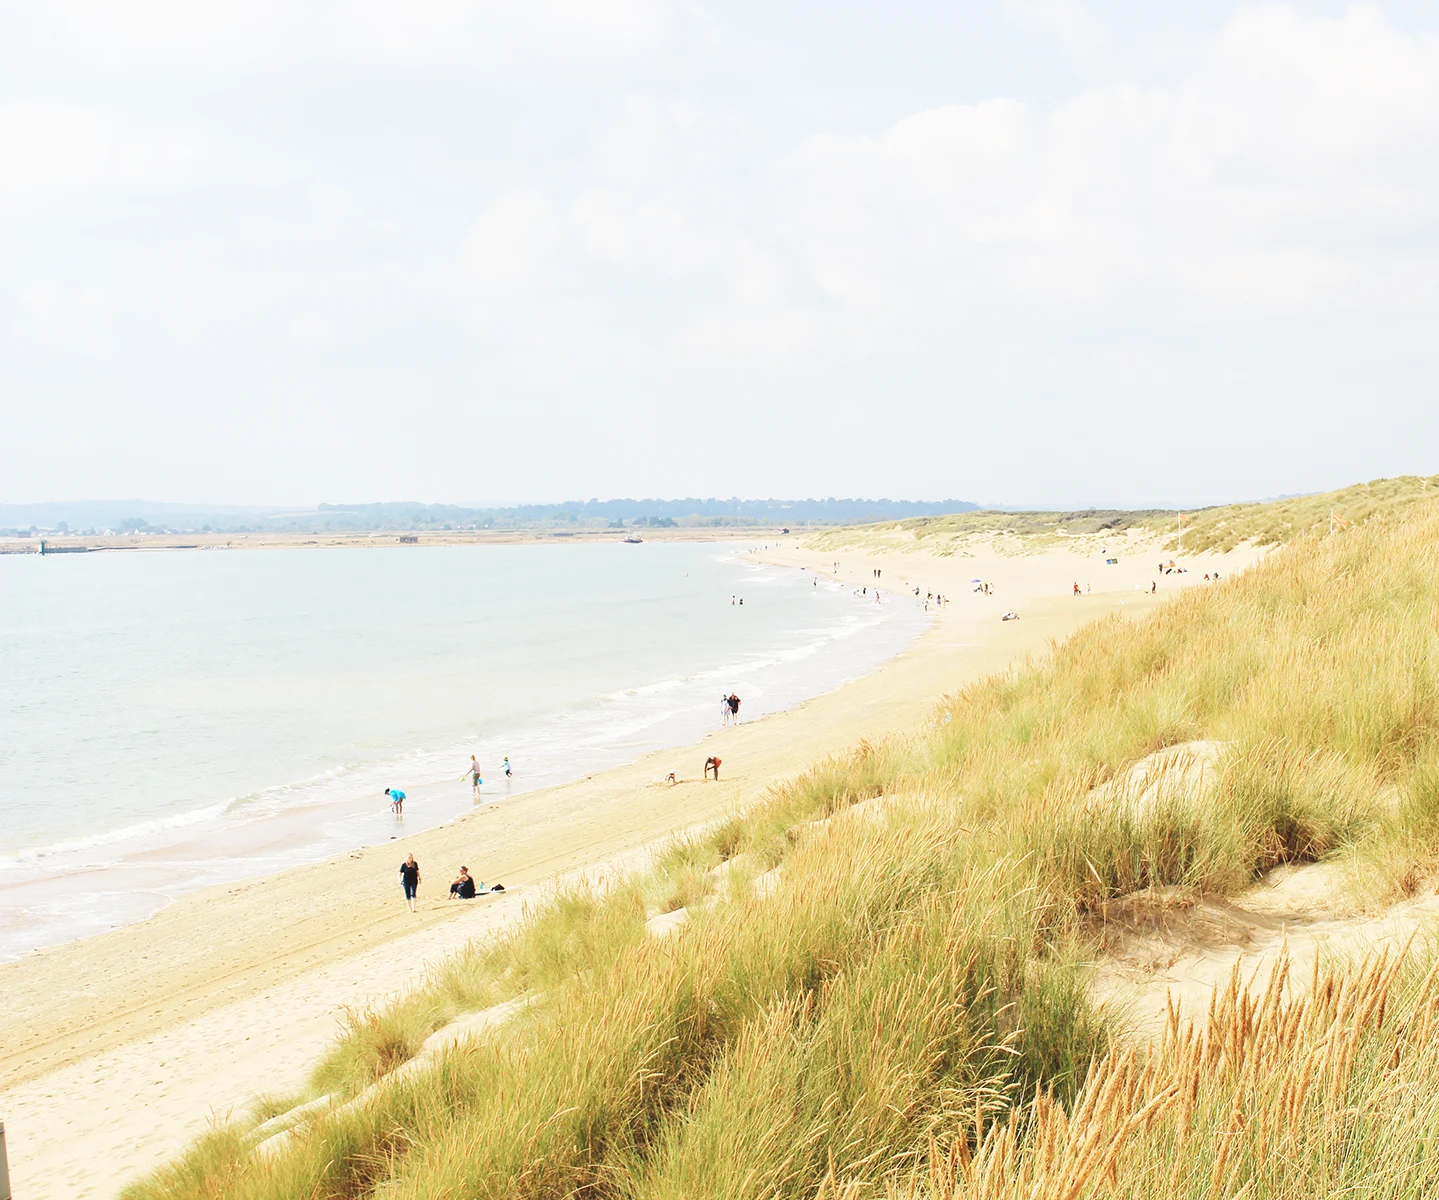 A sandy beach on a sunny day with grassy sand dunes leading down to a beach dotted with people.